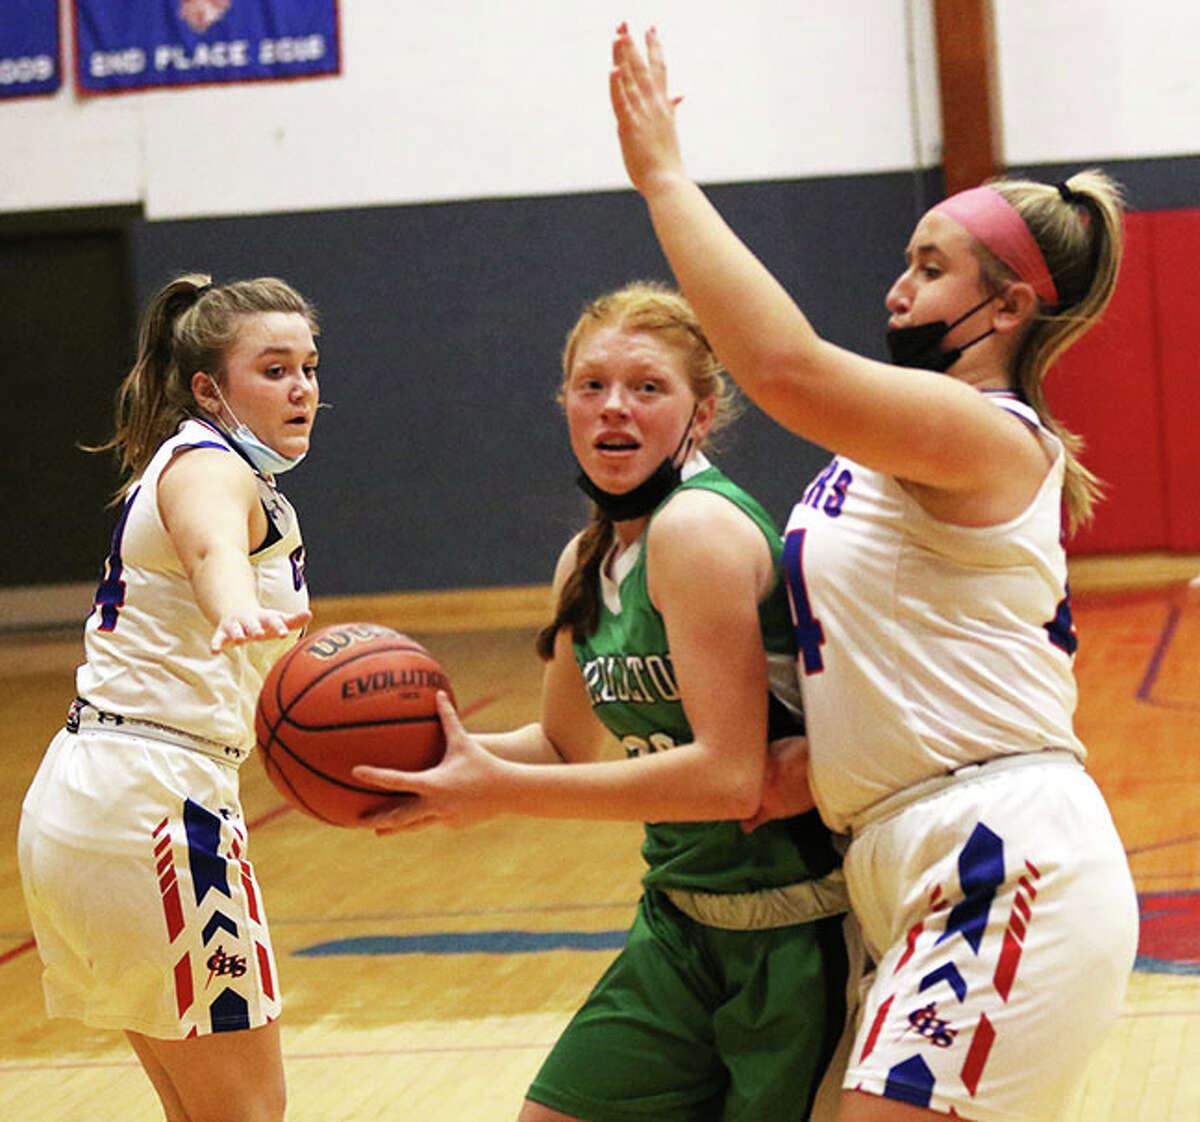 Carrollton's Lauren Flowers, center, scored 22 points and led the Hawks to a 59-33 victory over Triopia Monday. she is shown in previous action against Carlinville.